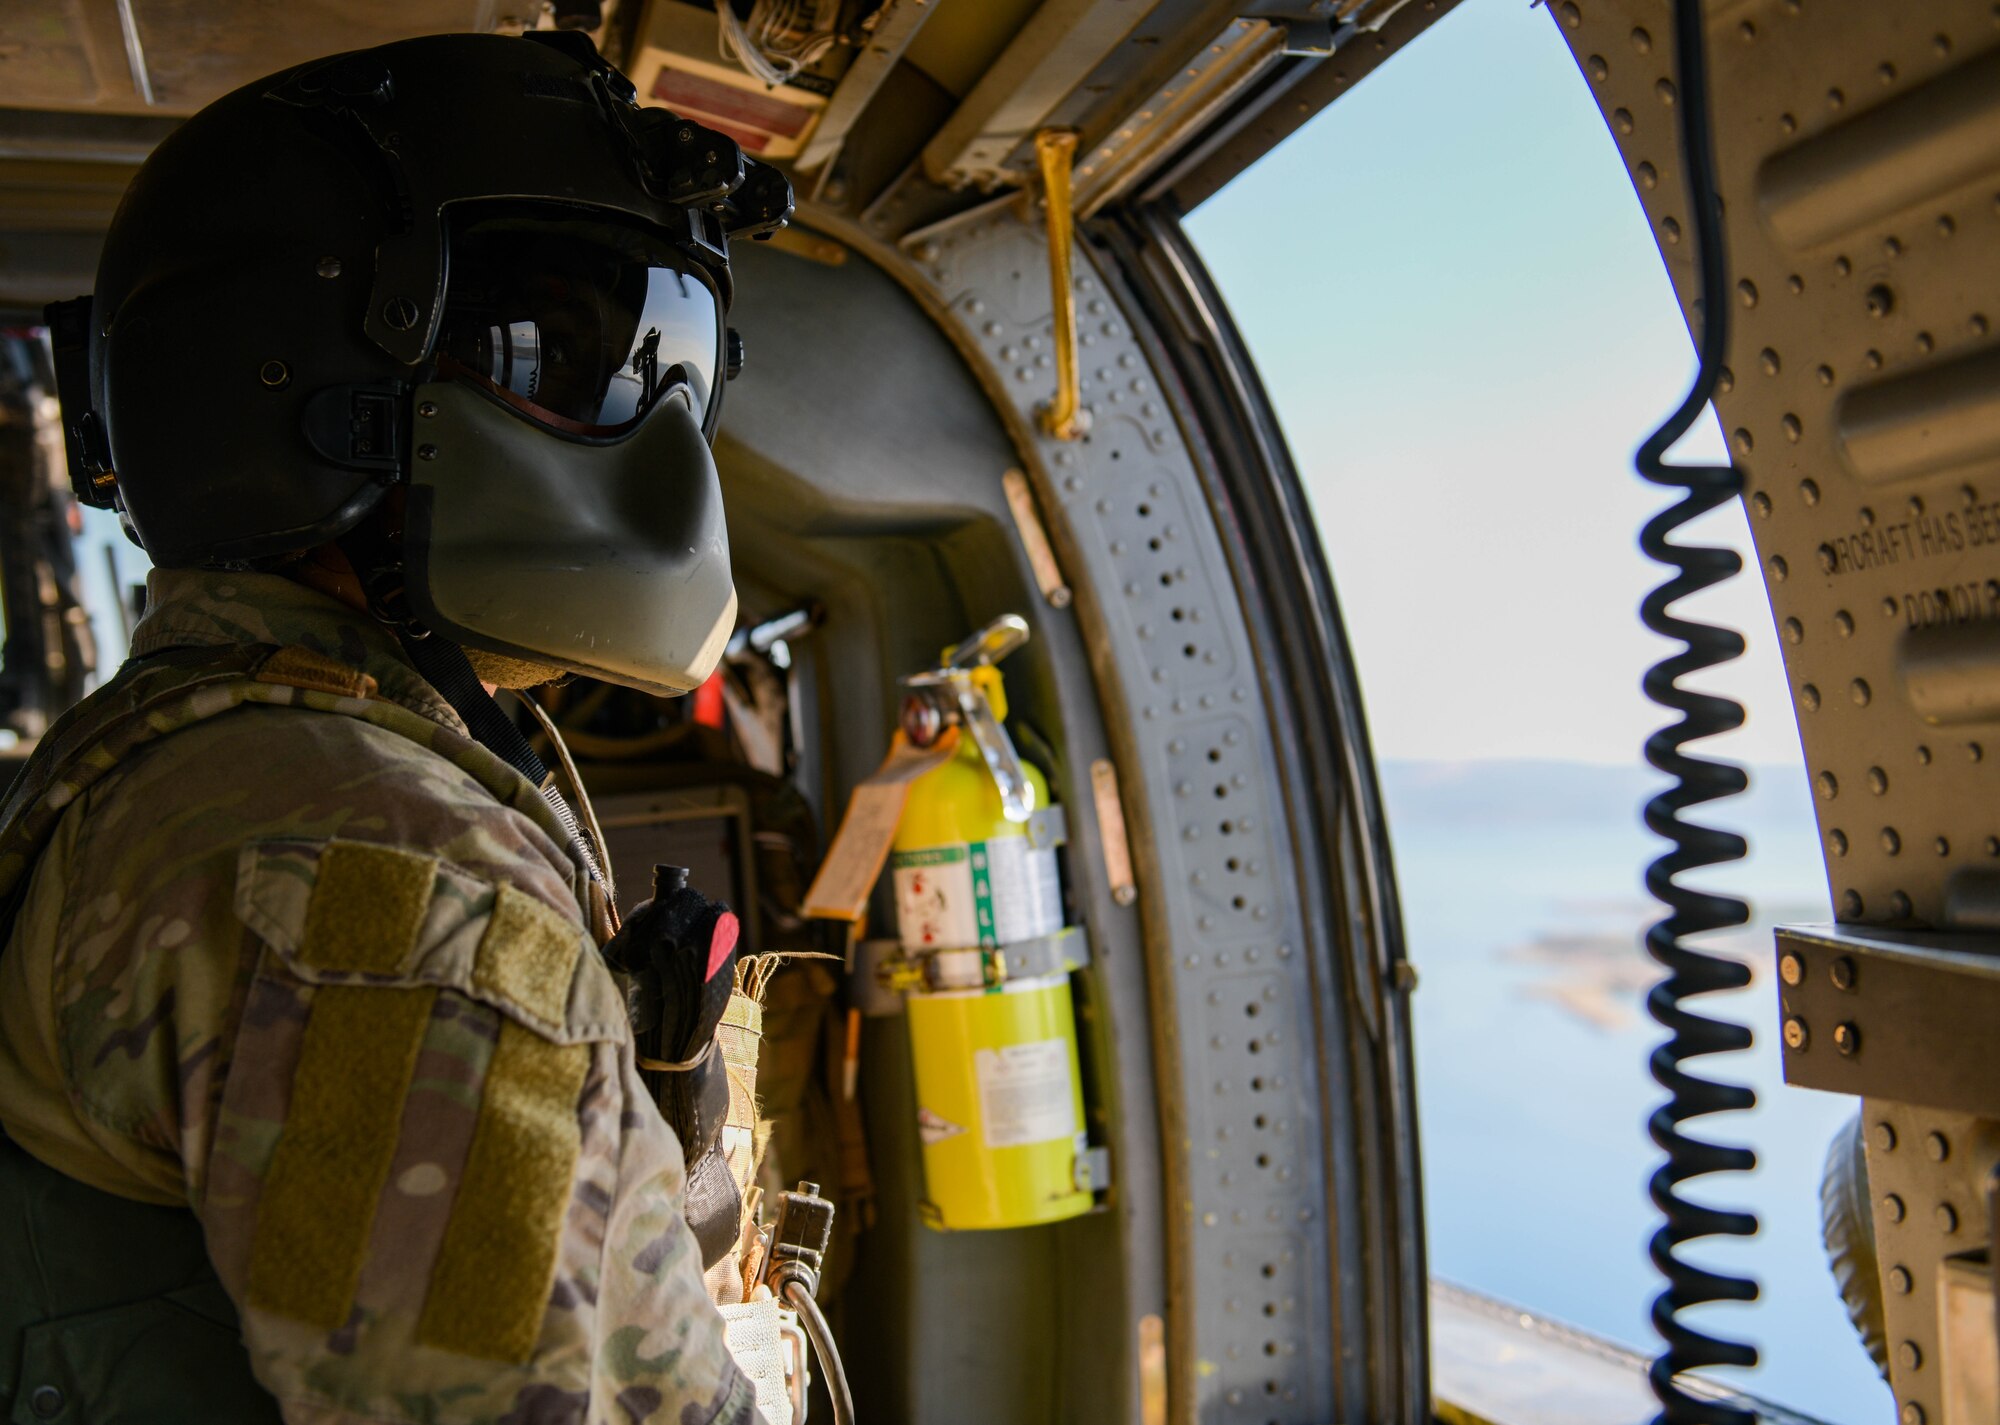 U.S. Air Force Staff Sgt. Kinga Hudson, 56th Rescue Squadron special missions aviator, looks out of an HH-60G Pave Hawk’s window during its final sortie, Sept. 23, 2021. There are five helicopters assigned to the 56th RQS with two retiring by the end of 2021. (U.S. Air Force photo by Senior Airman Brooke Moeder)